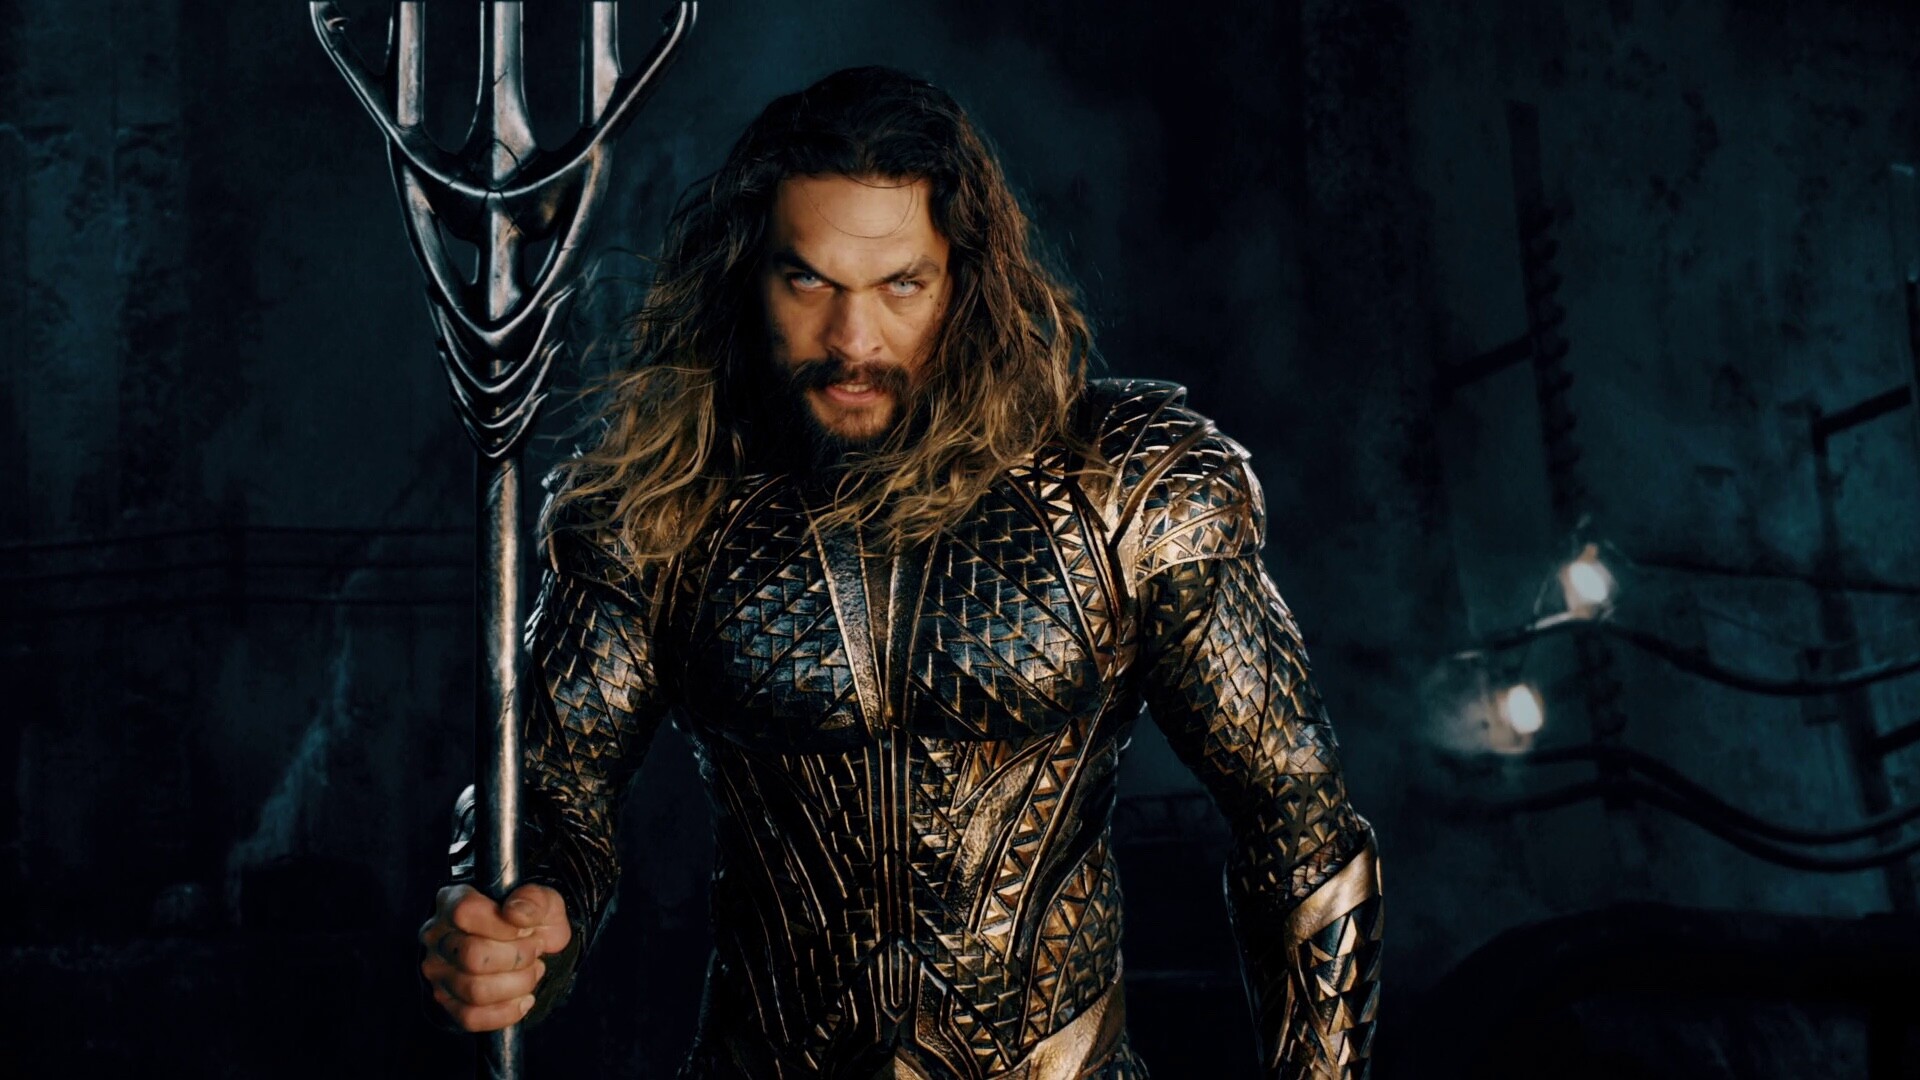 Aquaman and the Lost Kingdom: A sequel in the franchise where the first film was about Orm trying to plot a war against the surface world. 1920x1080 Full HD Wallpaper.